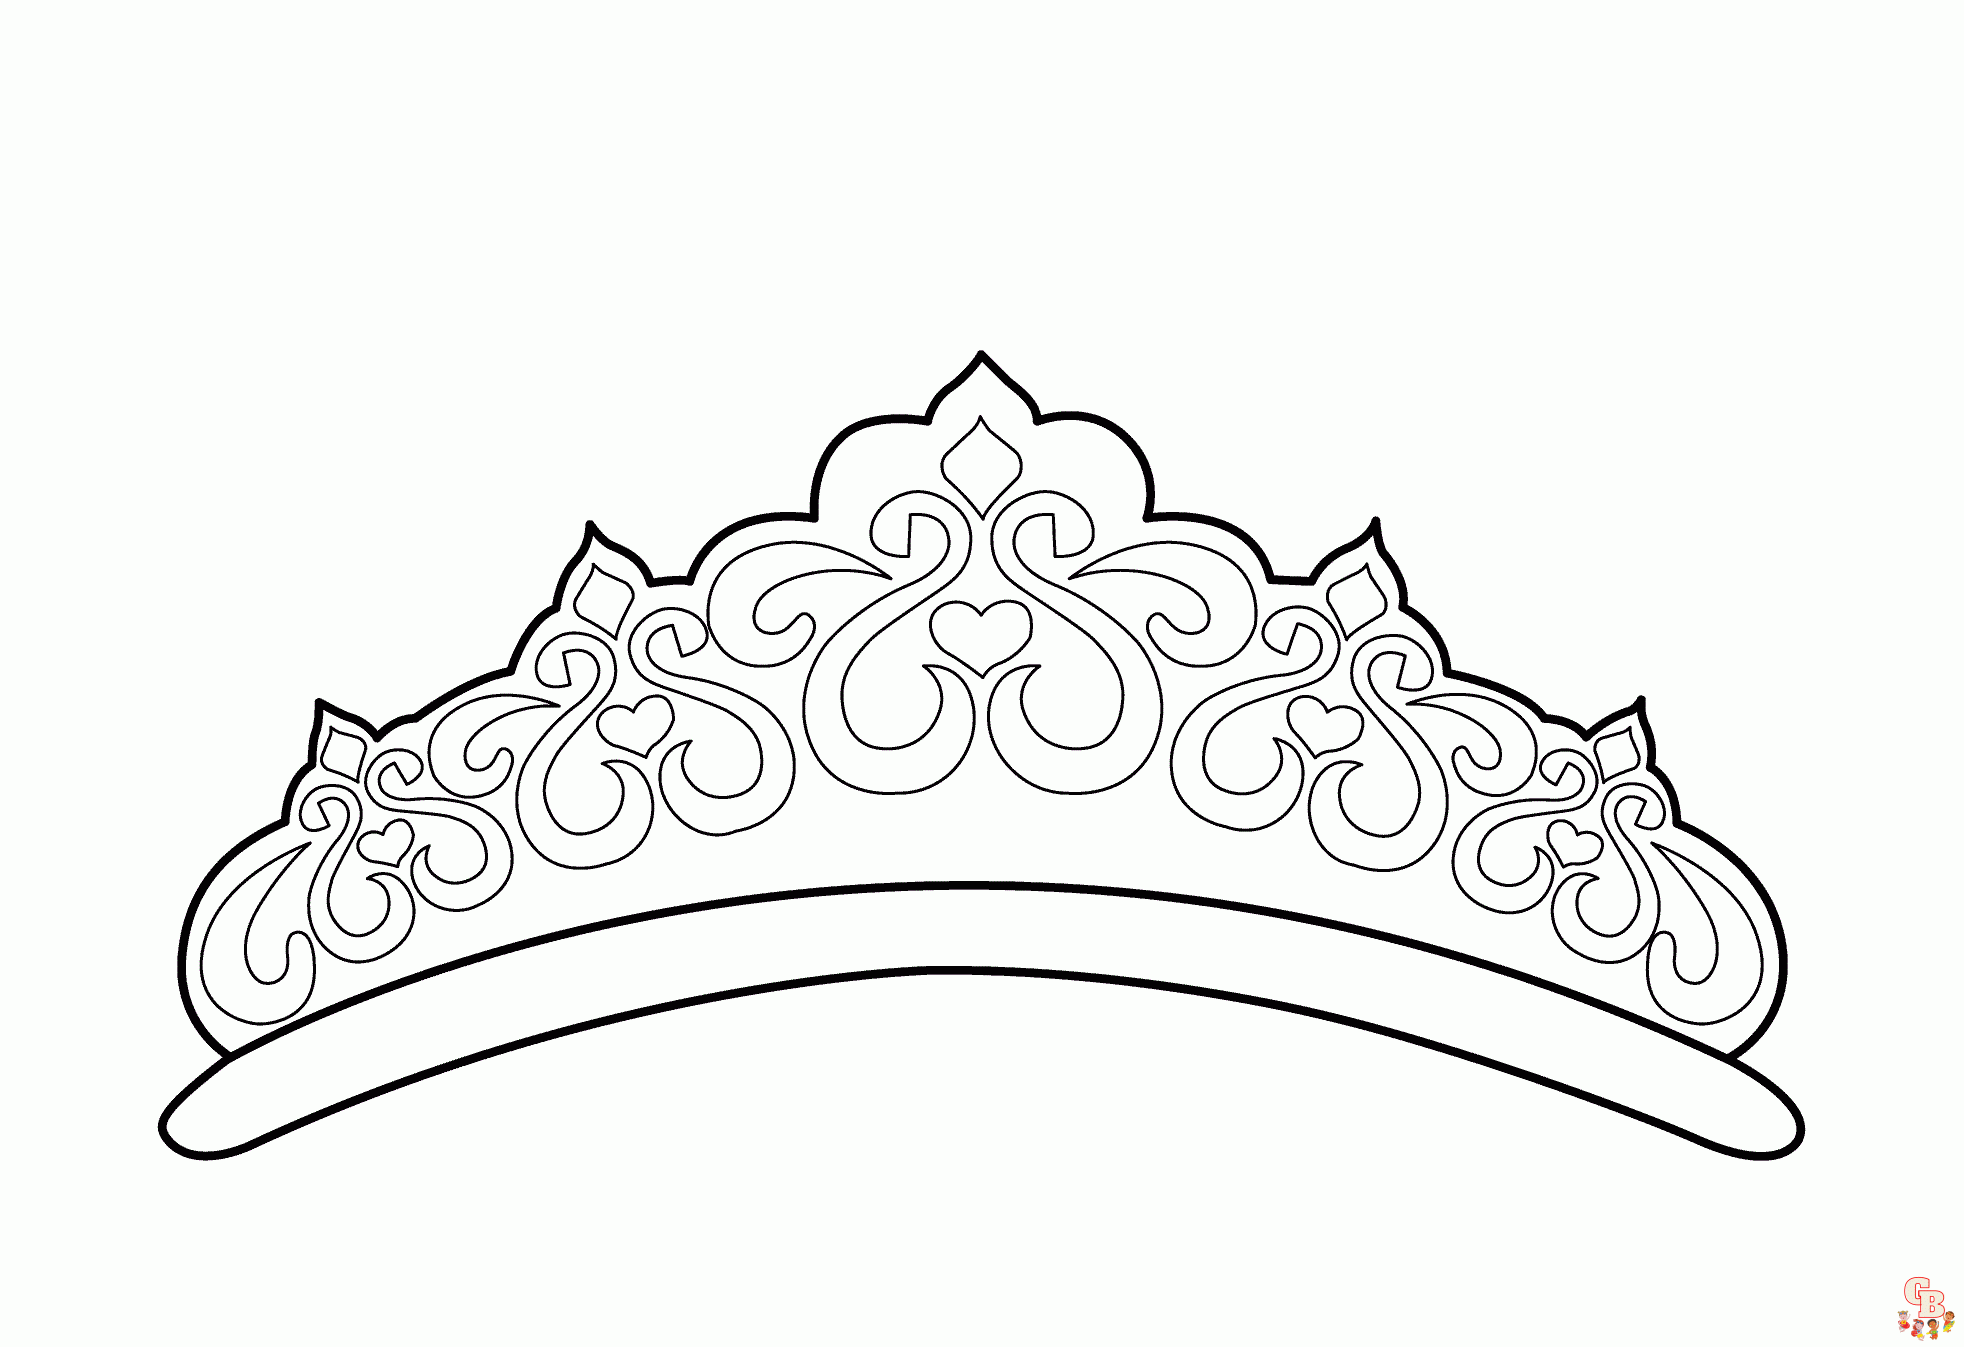 Tiara coloring pages to print